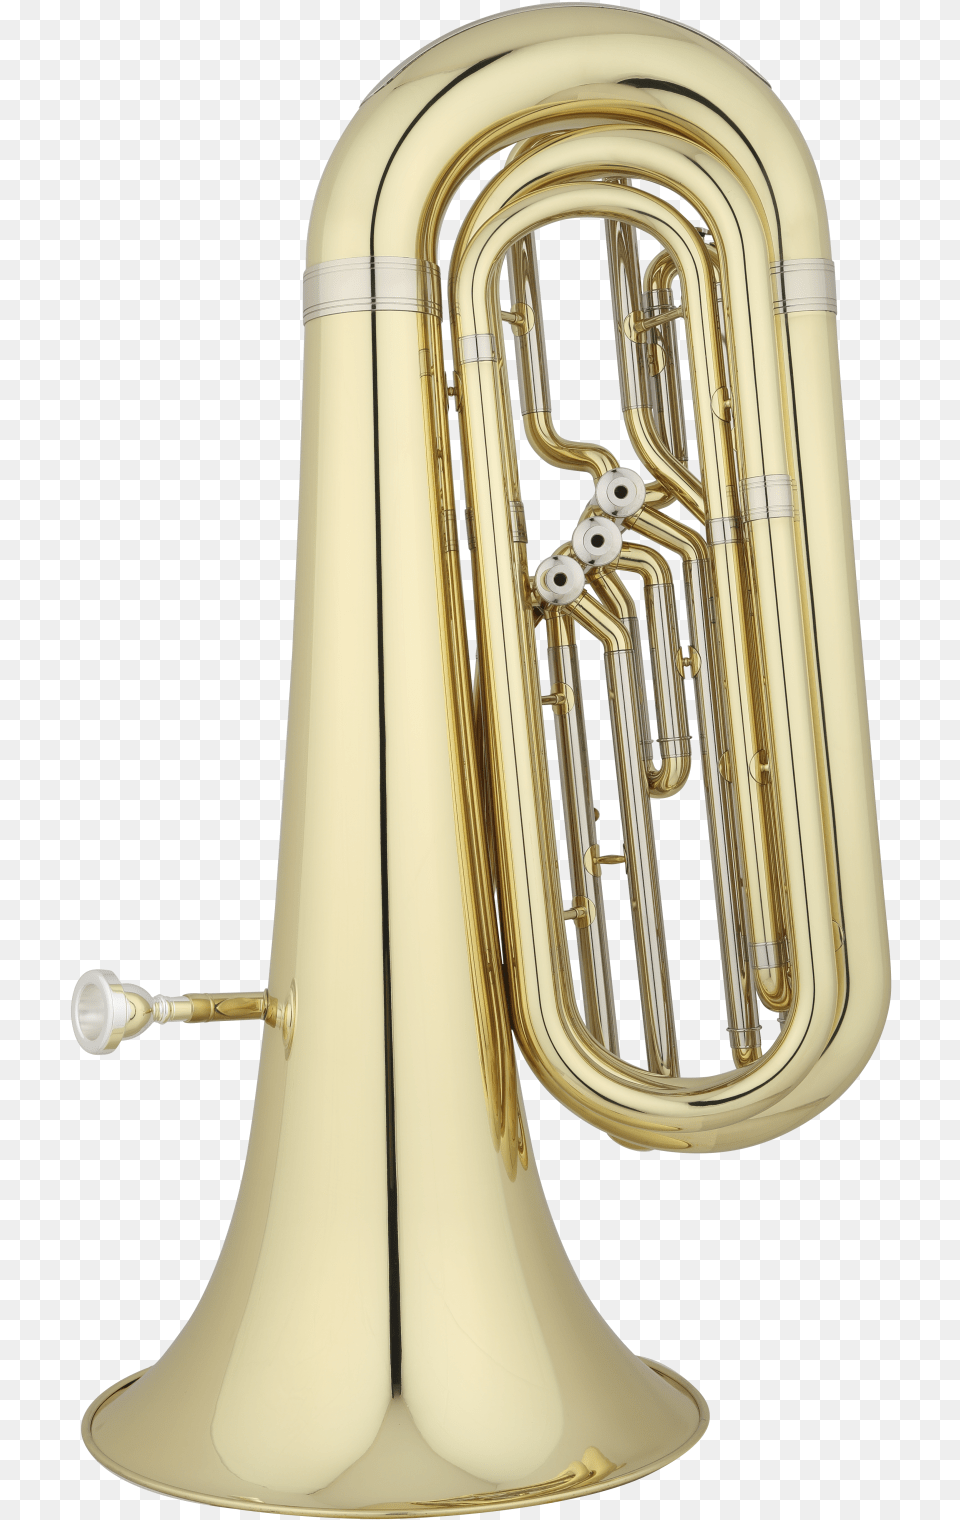 Tuba Types Of Trombone, Brass Section, Horn, Musical Instrument Free Transparent Png